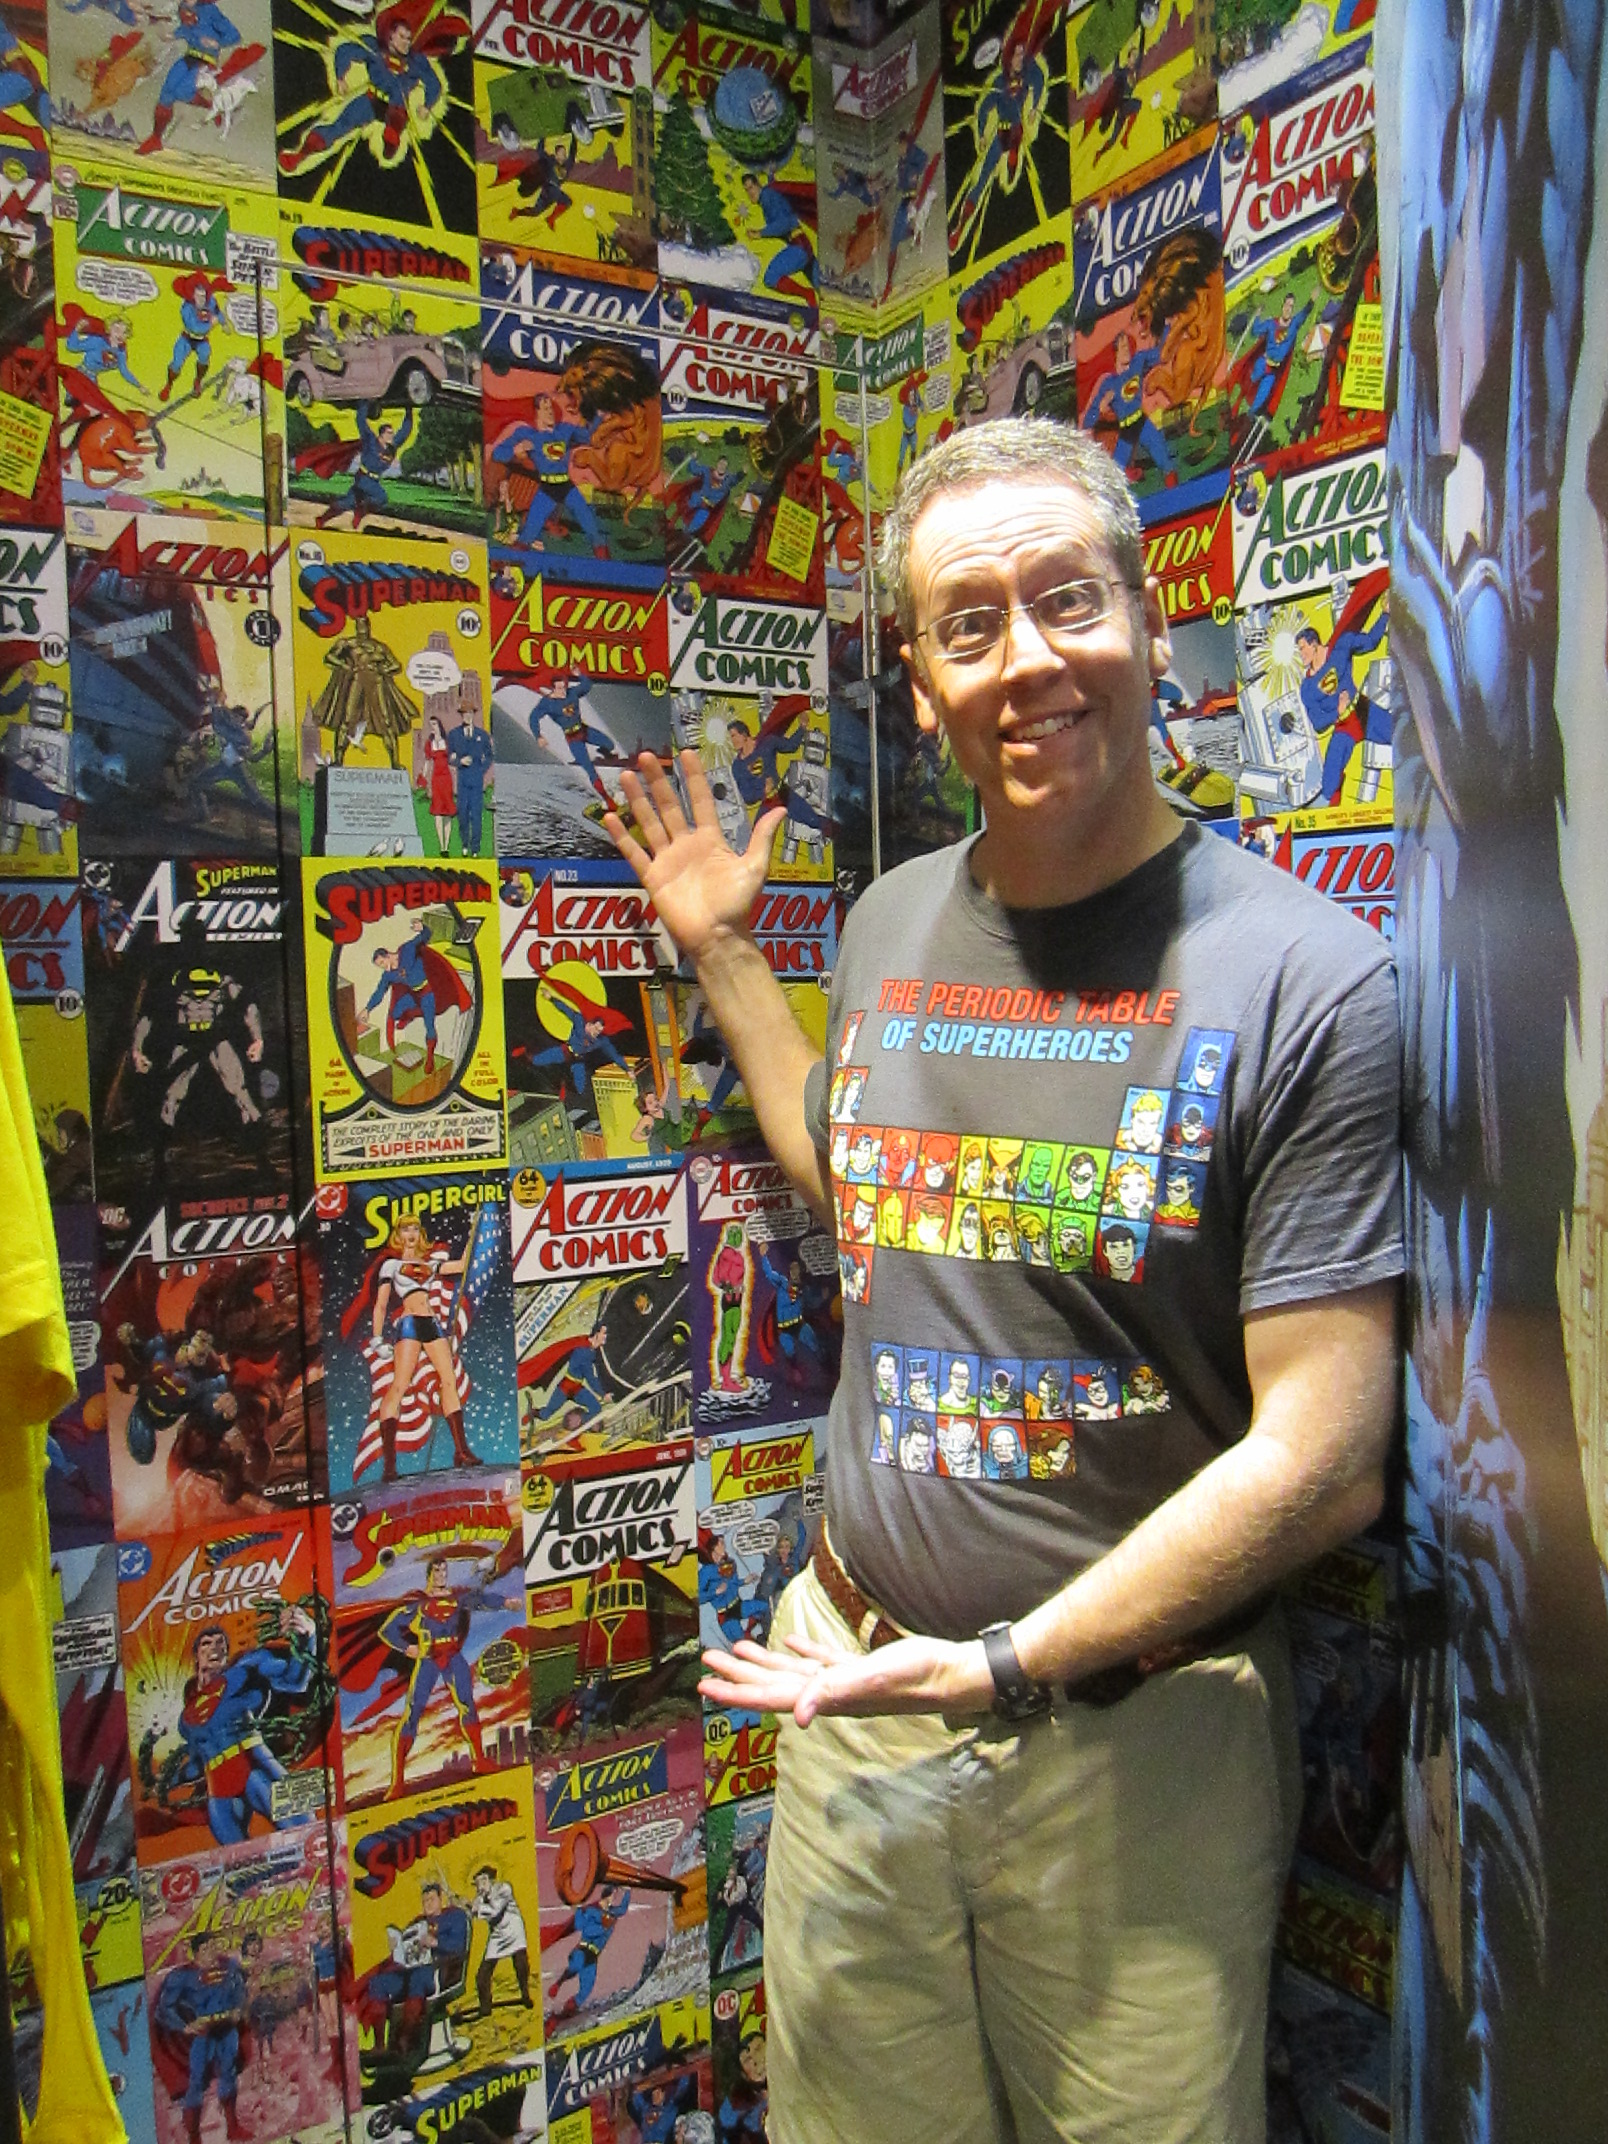 The dressing room at the DC Comic Super Hero Store in Hong Kong